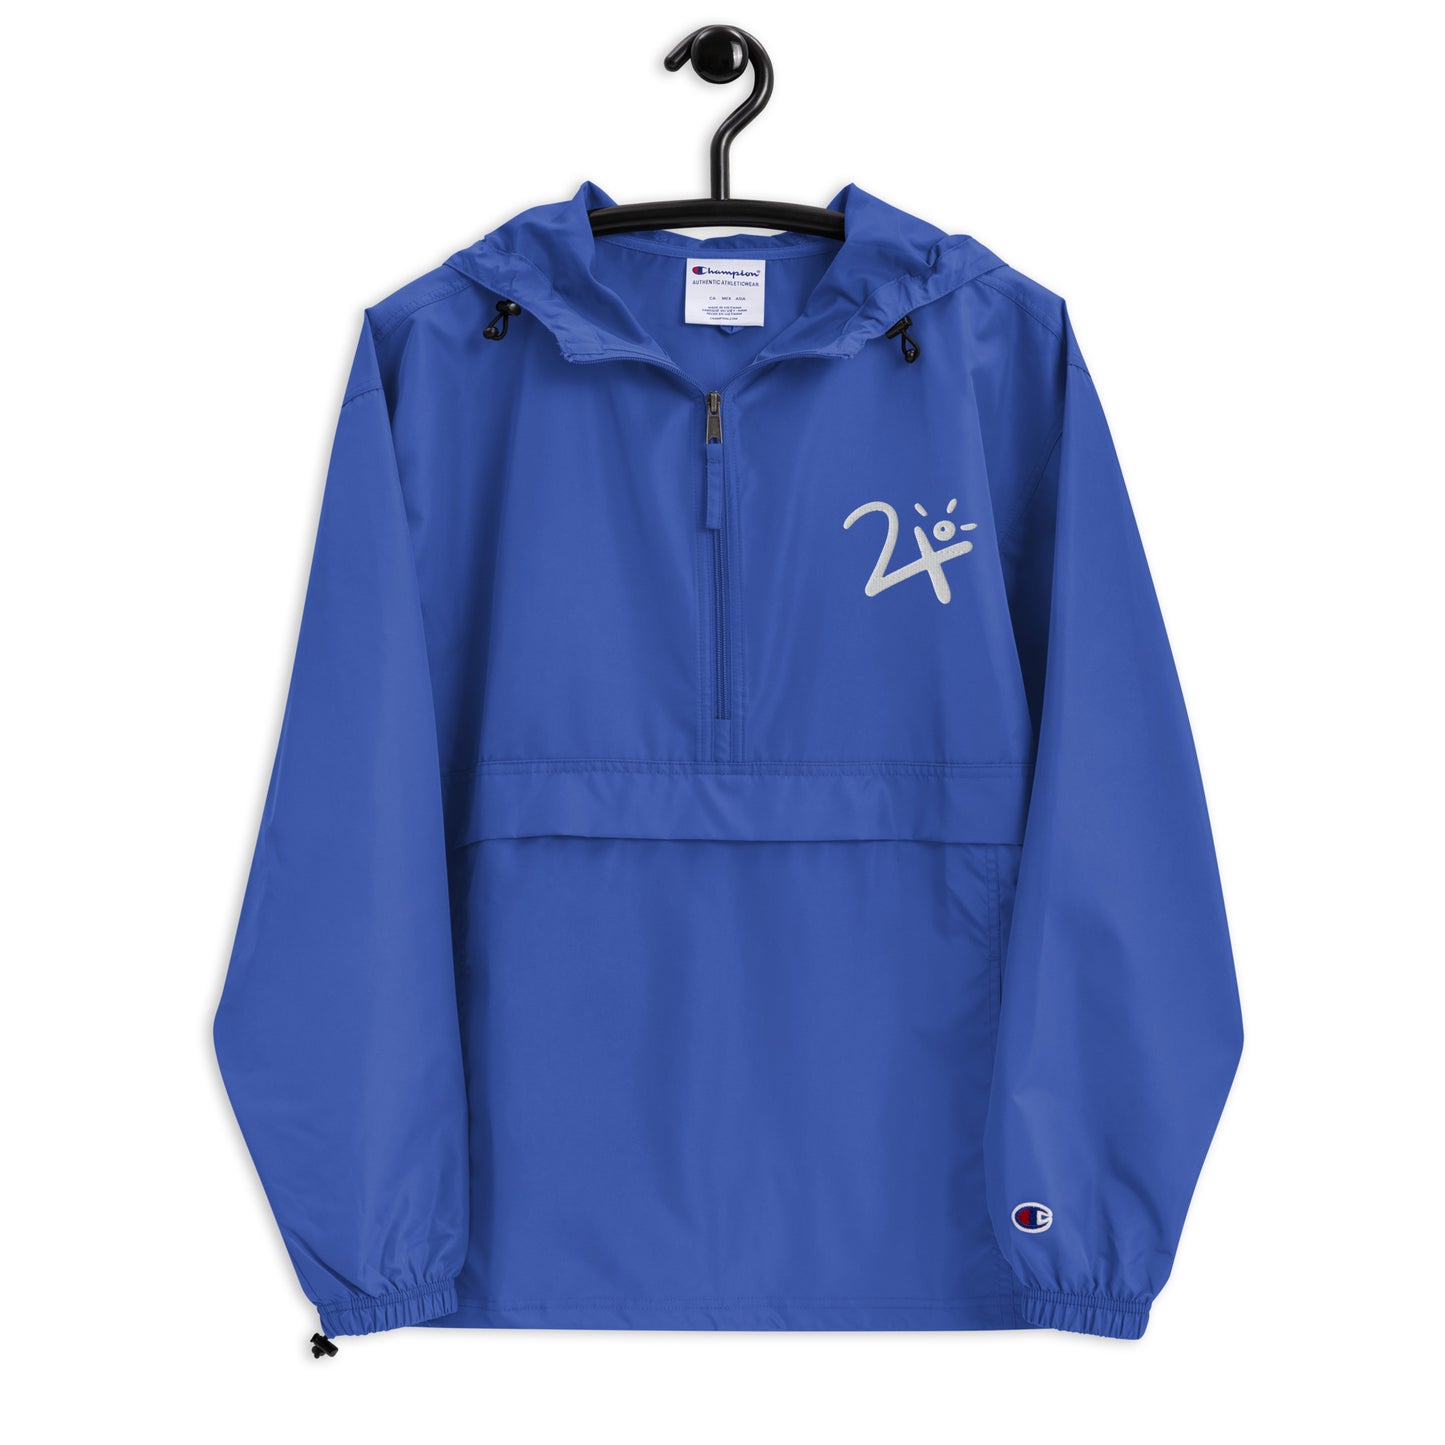 Embroidered Champion 2x10 Packable Jacket